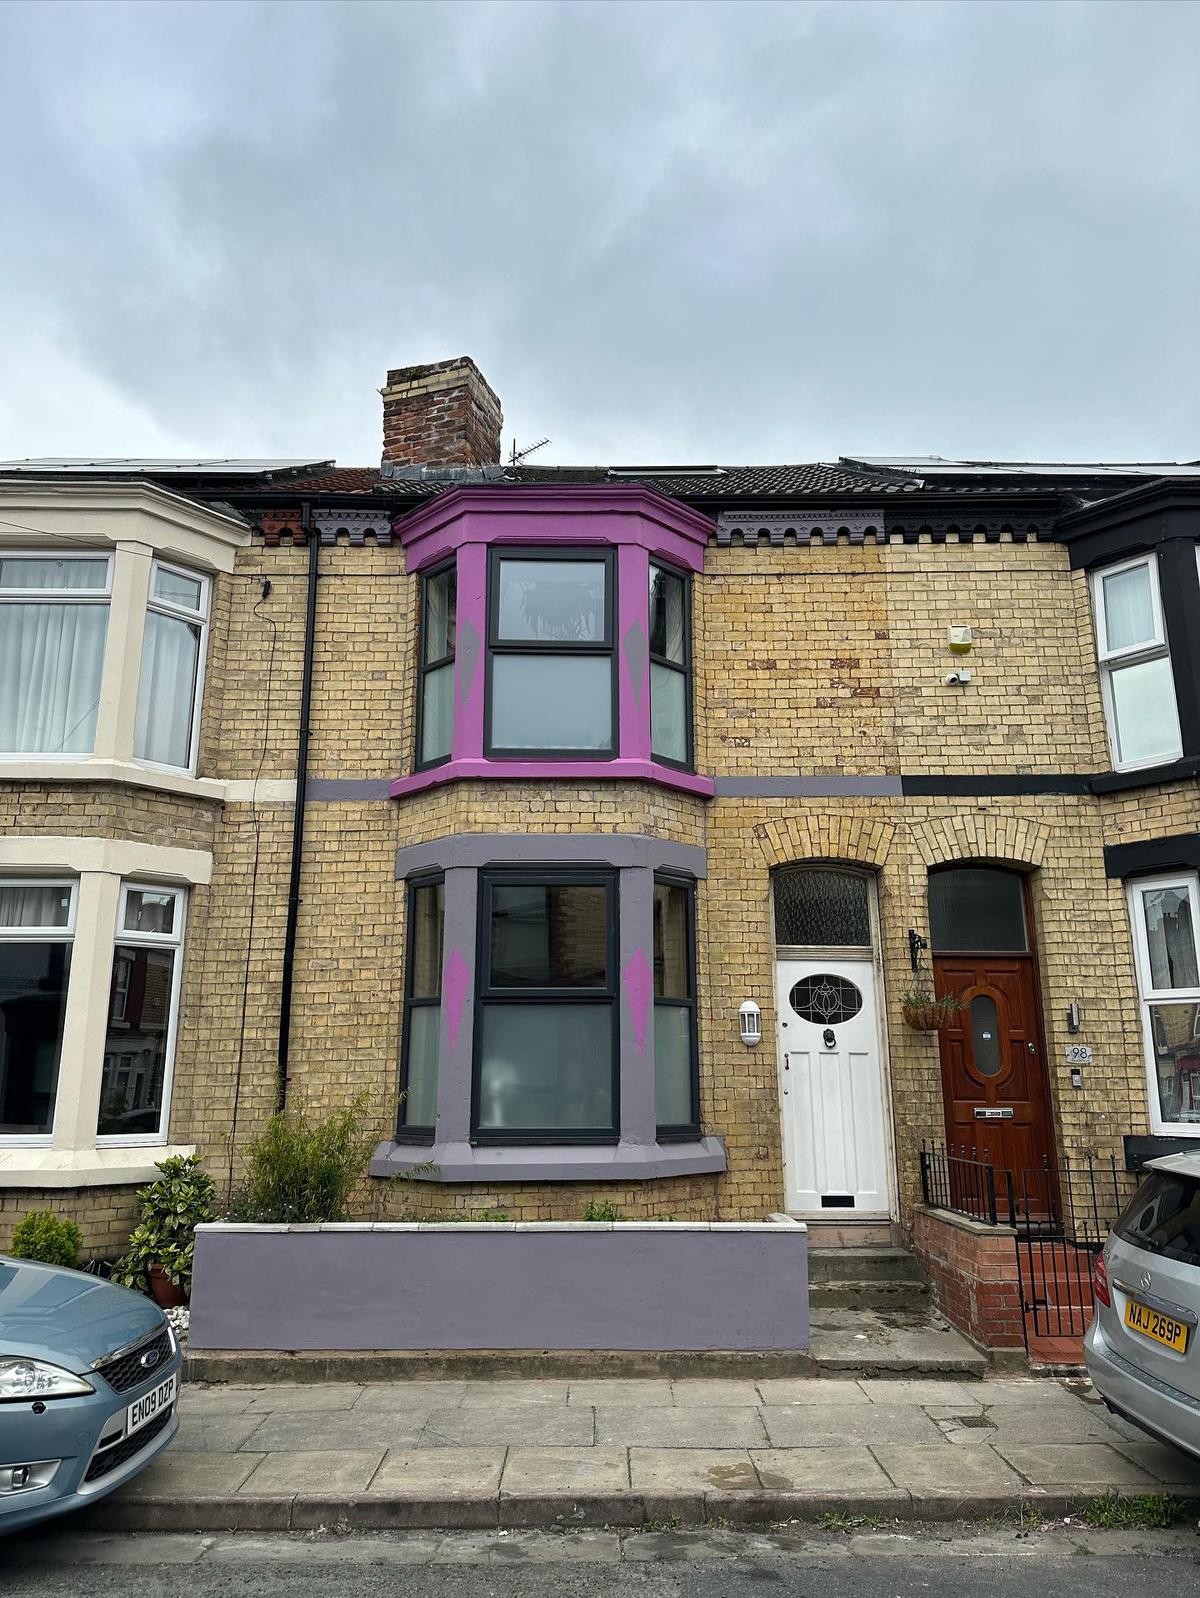 The front of the house after renovation. (Courtesy of <a href="https://www.instagram.com/homesforapound/">Maxine Sharples</a>)